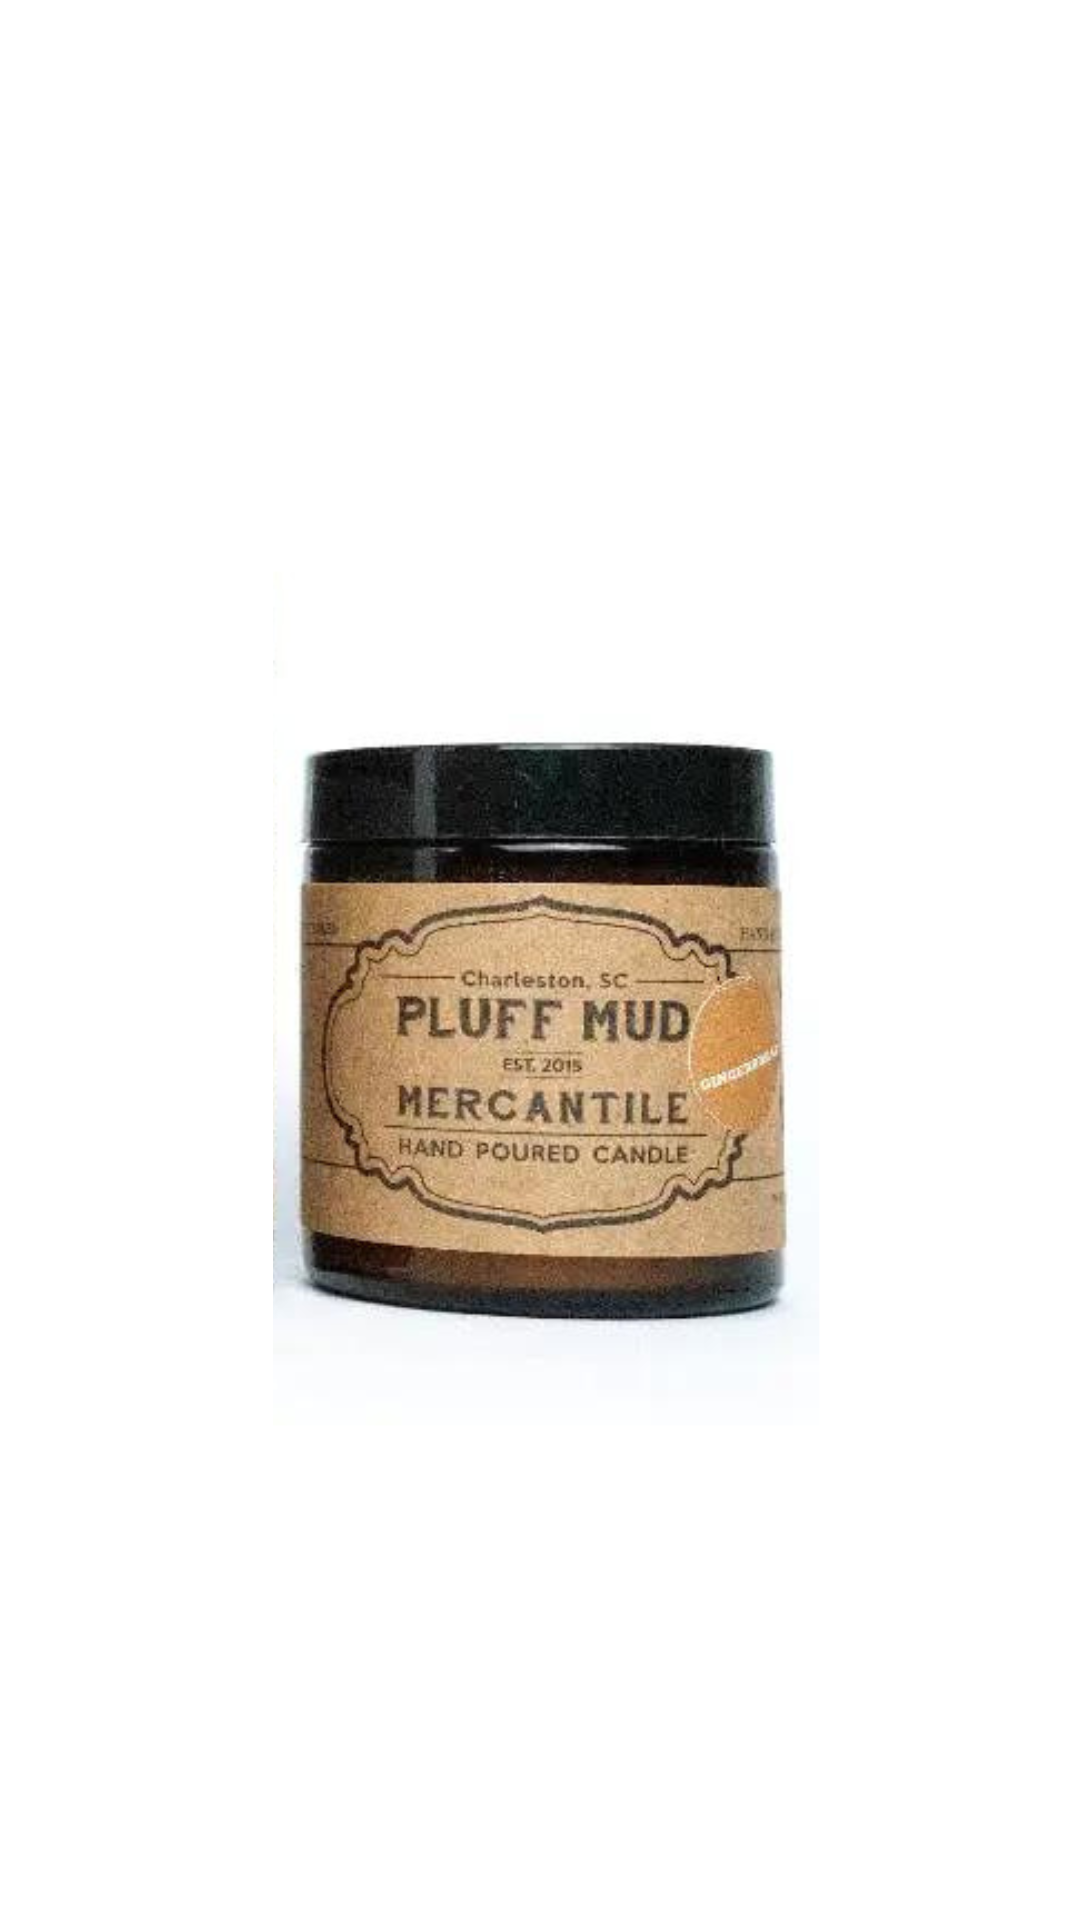 Bourbon Maple Apple Hand Poured Soy Candle - Pluff Mud Mercantile